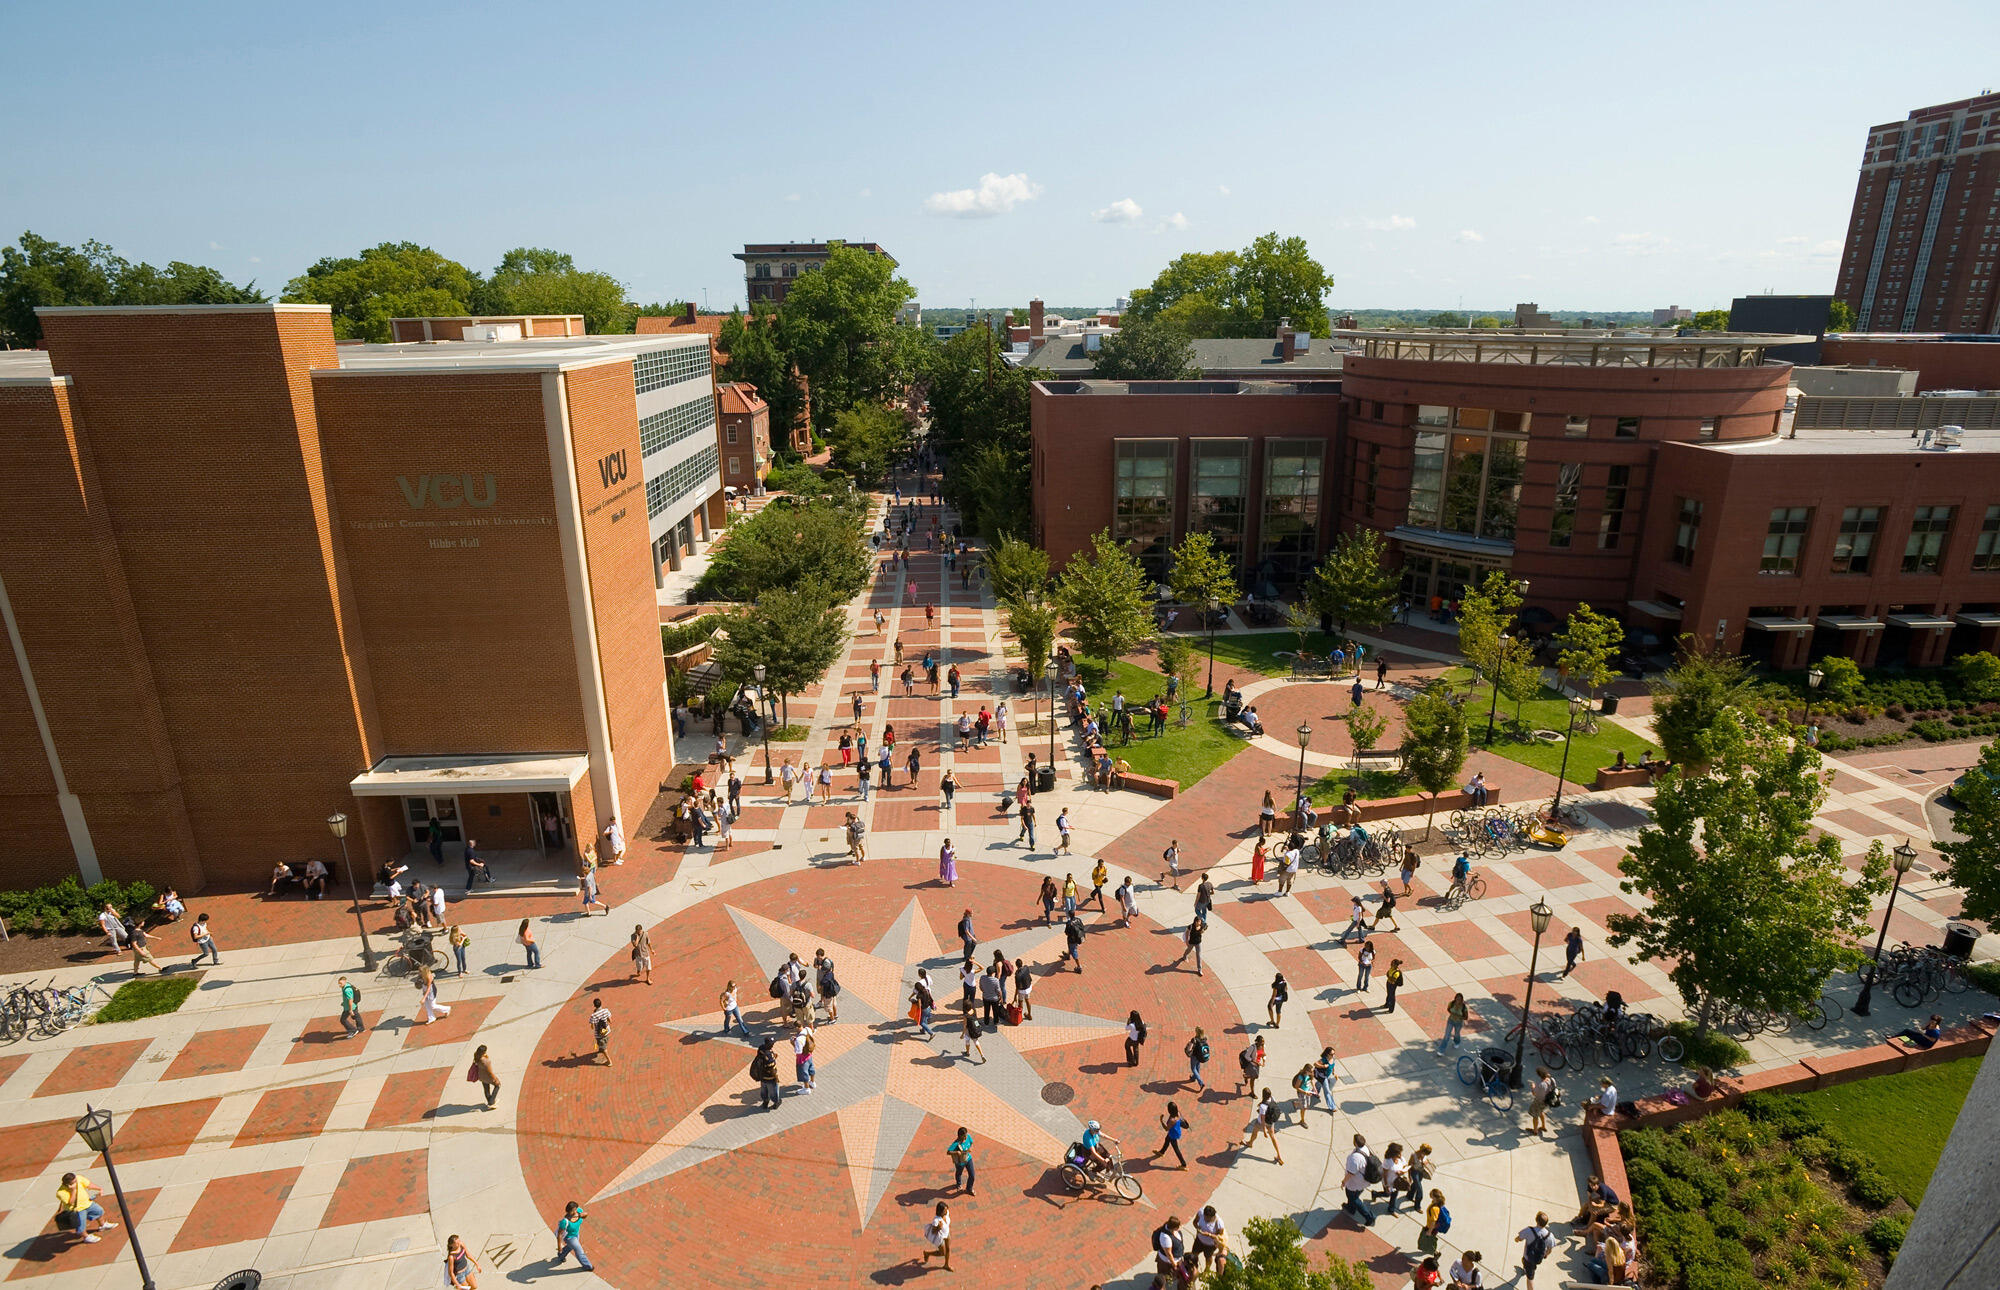 Aerial image of the Compass area at VCU.